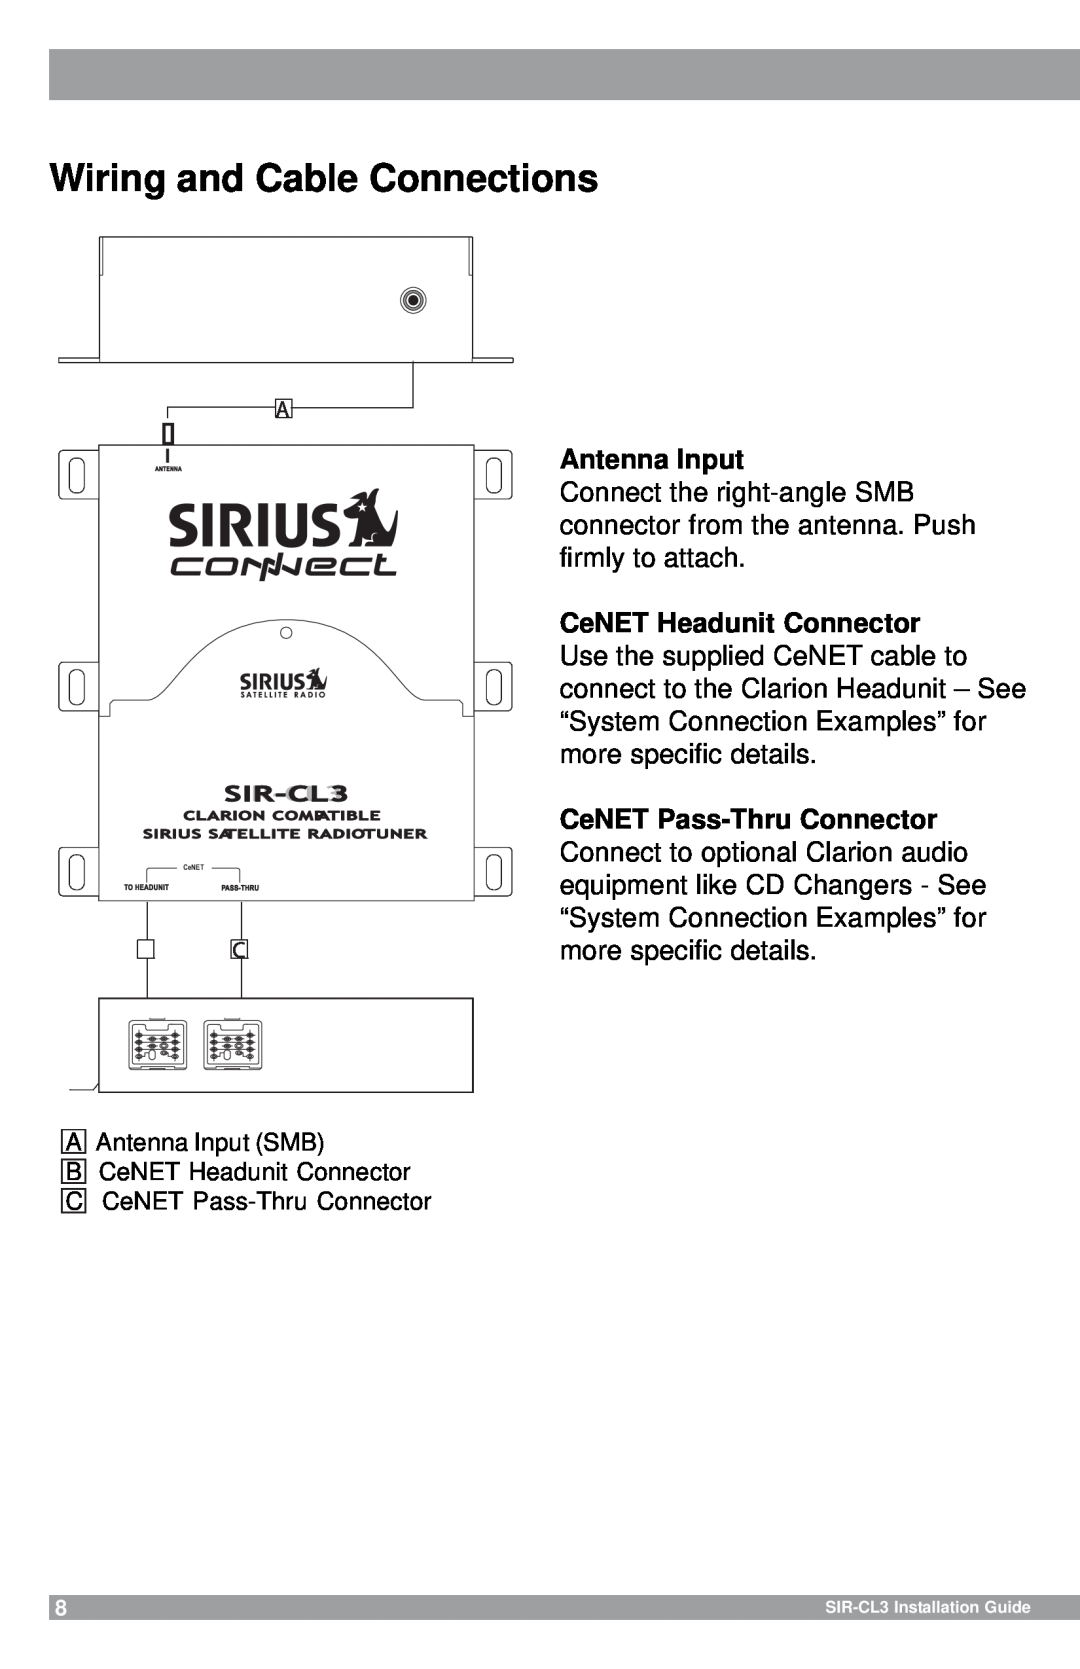 Sirius Satellite Radio SIR-CL3 manual Wiring and Cable Connections, Antenna Input, CeNET Pass-ThruConnector 